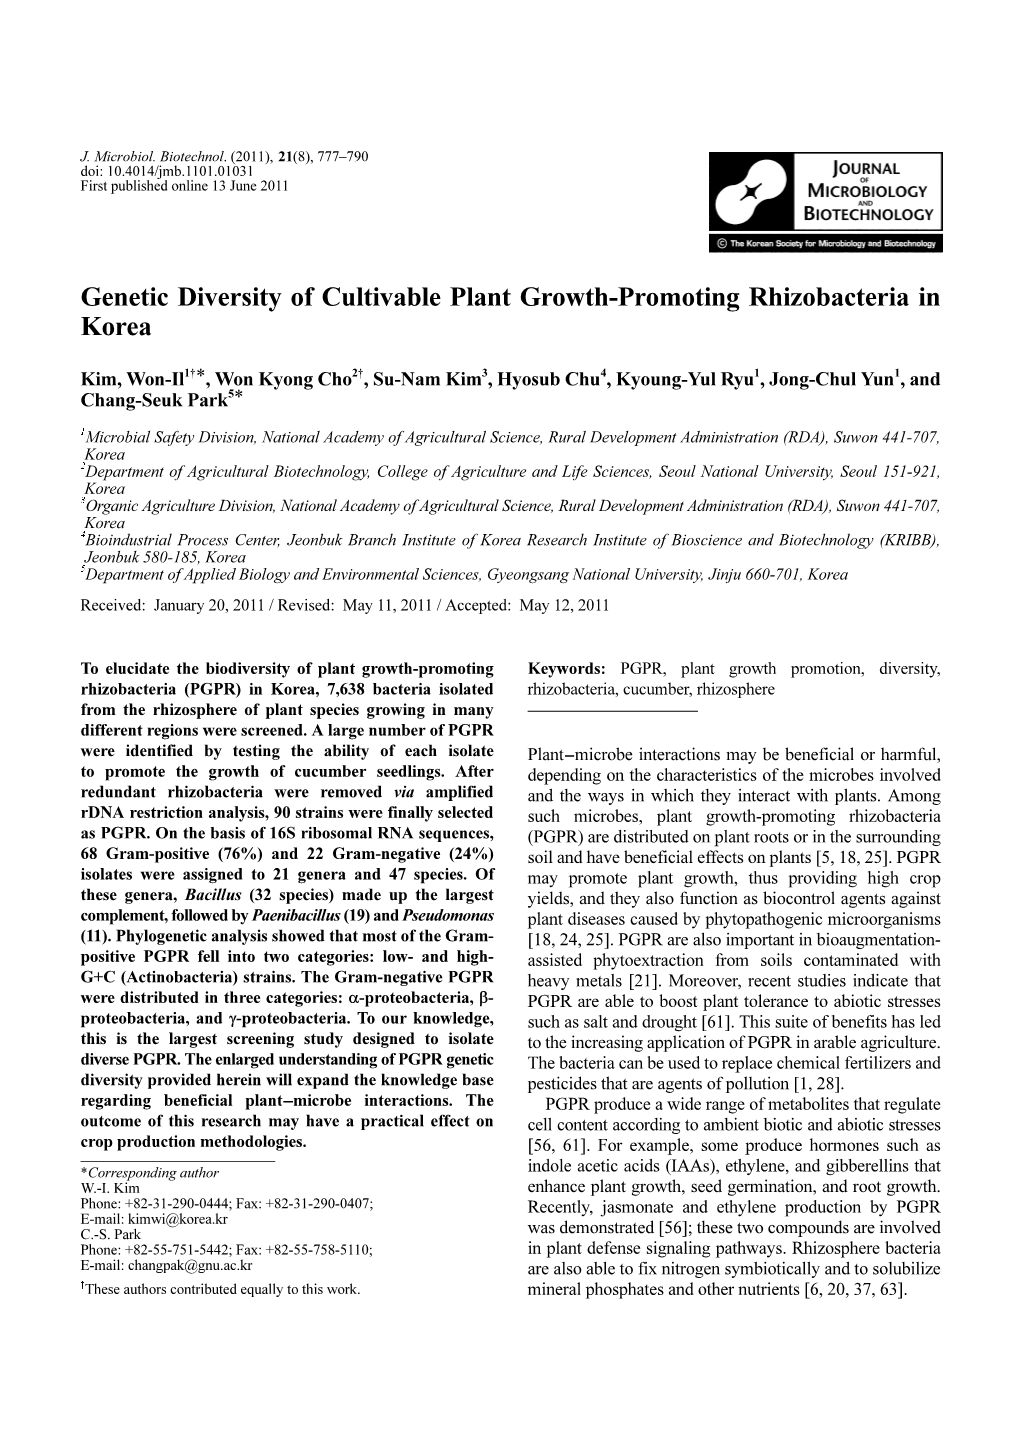 Genetic Diversity of Cultivable Plant Growth-Promoting Rhizobacteria in Korea